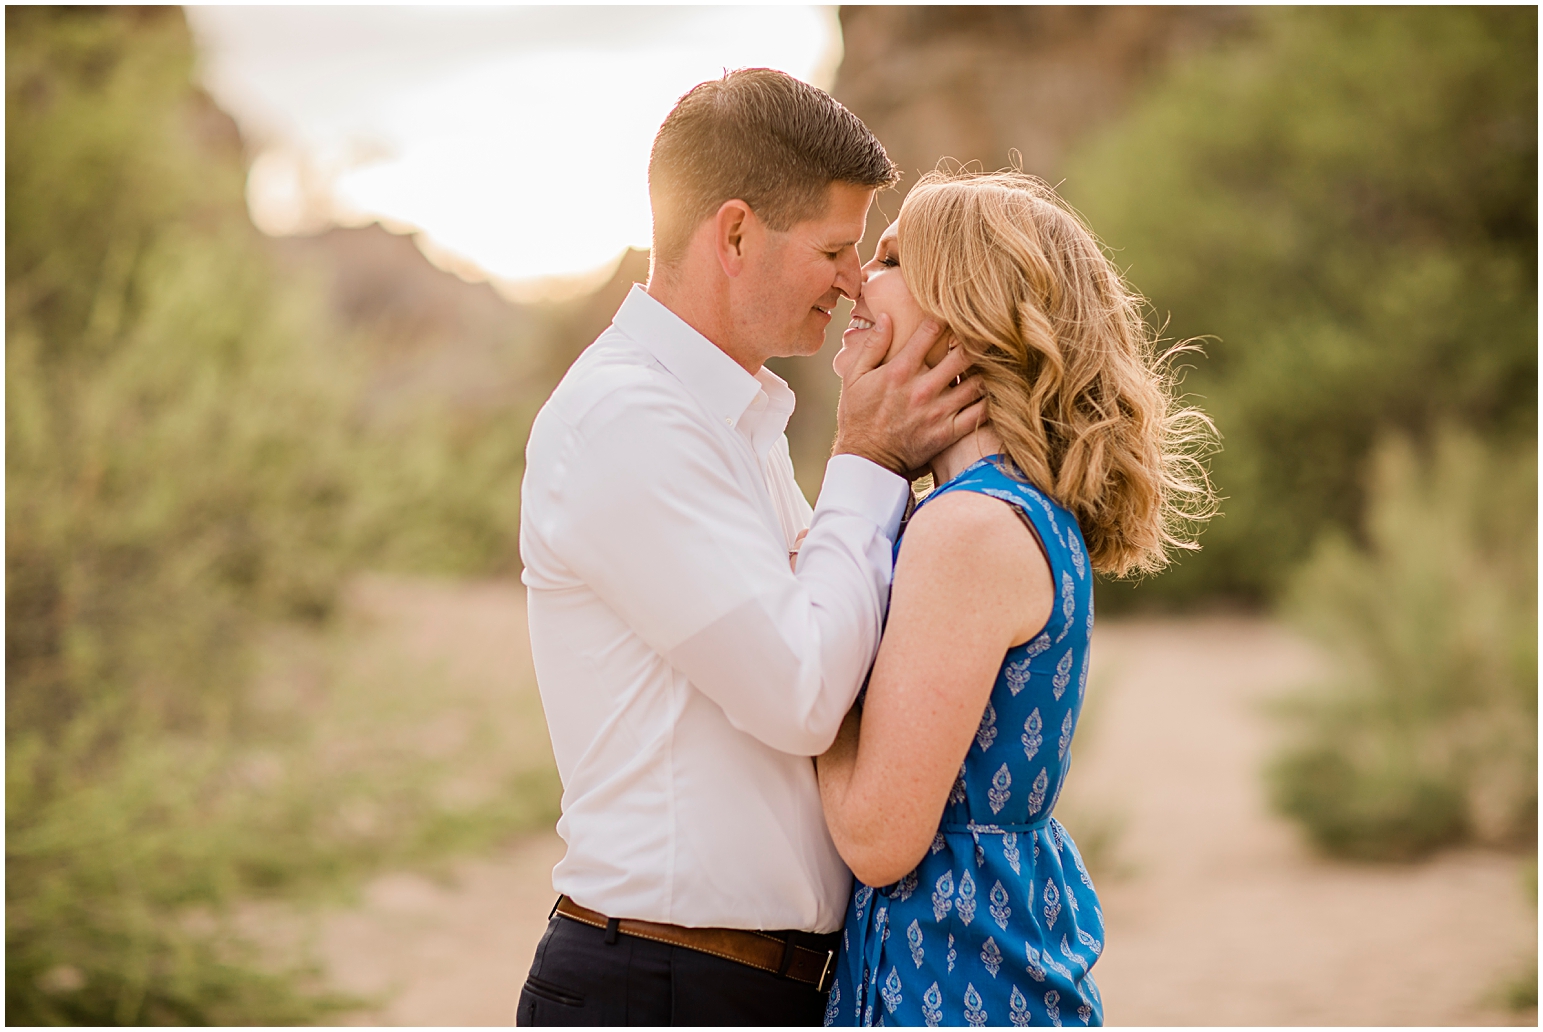 Honeybee Canyon Engagement Session in Tucson, Arizona with Amber Lea Photography.